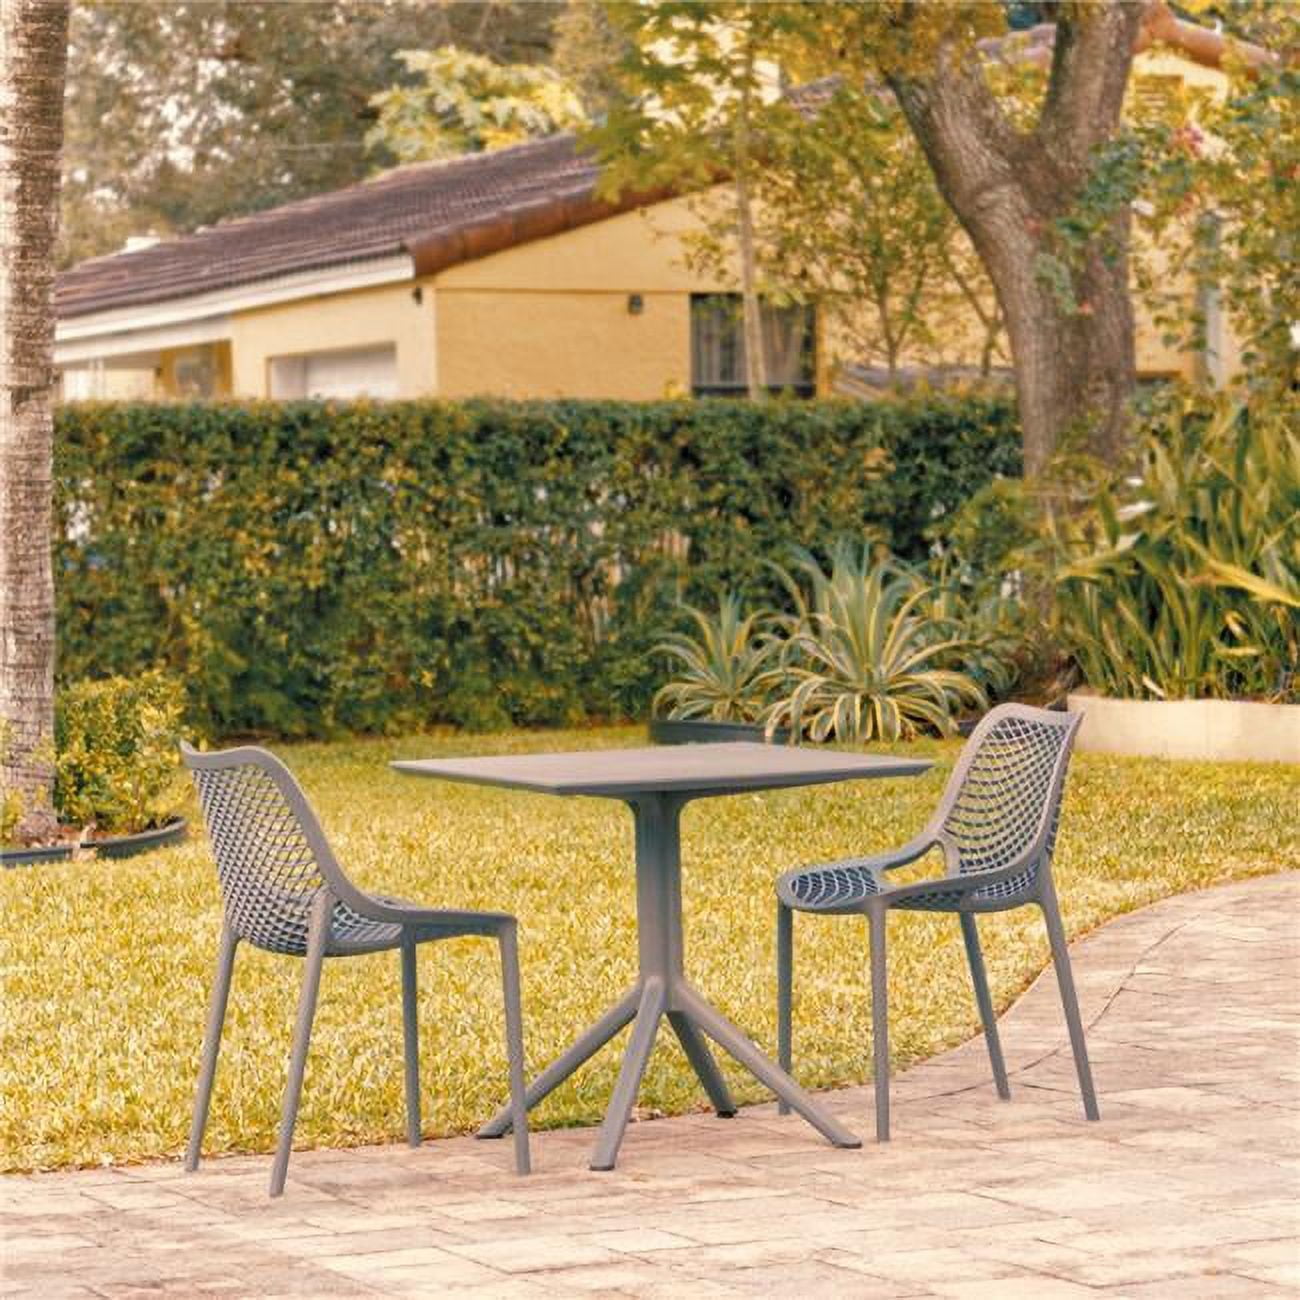 Isp1060s-dgr Air Patio Dining Set With 2 Chairs, Dark Grey